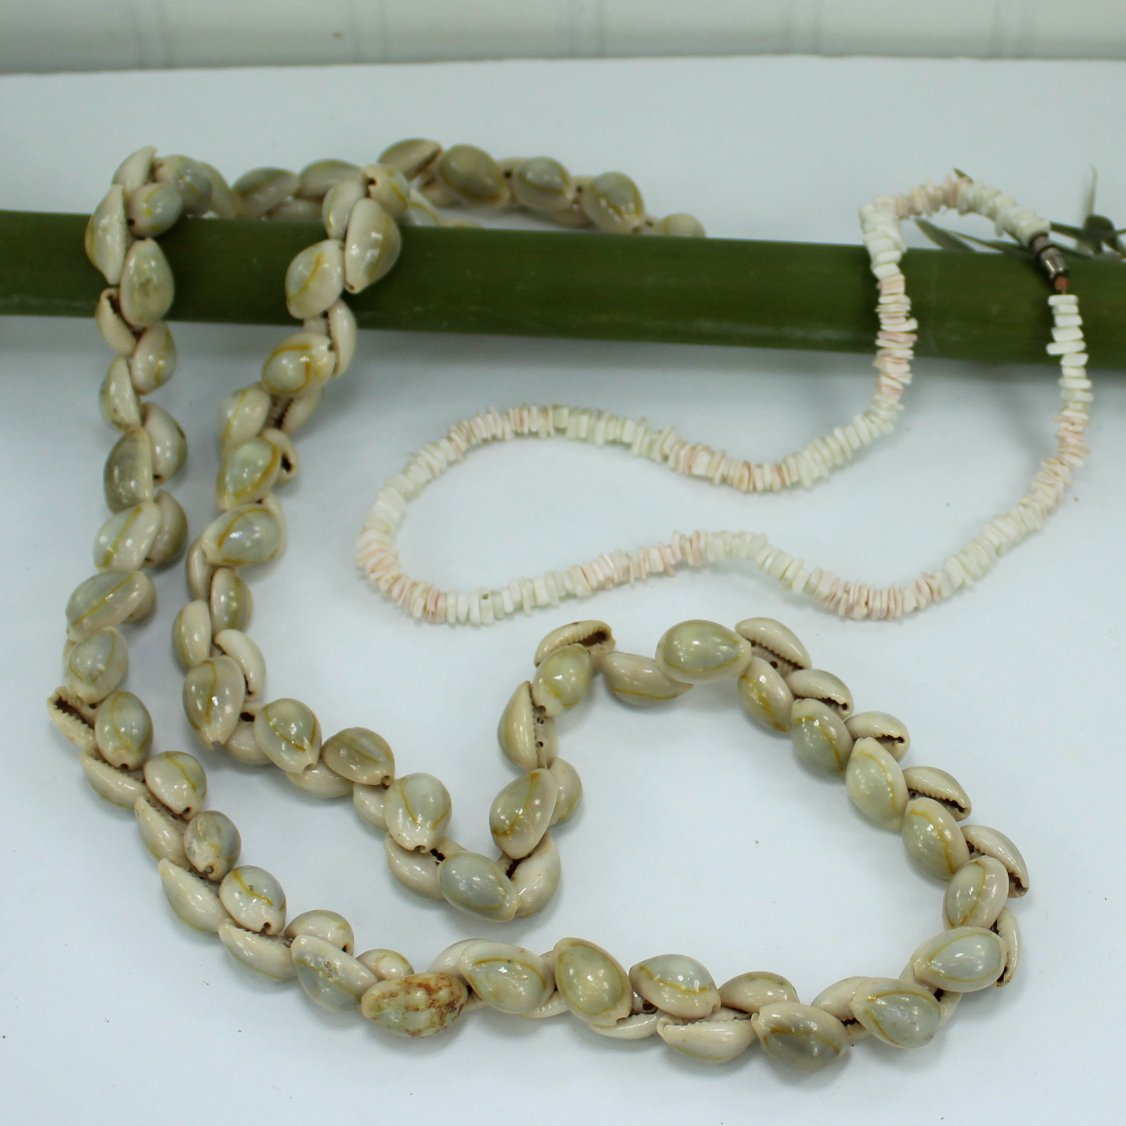 Puka Shell And Wood Bead Necklace With Wood Pendant And Brass Chain With  Lobster Clasp – Vintage Handmade Necklaces Shipped from ColoradoUS